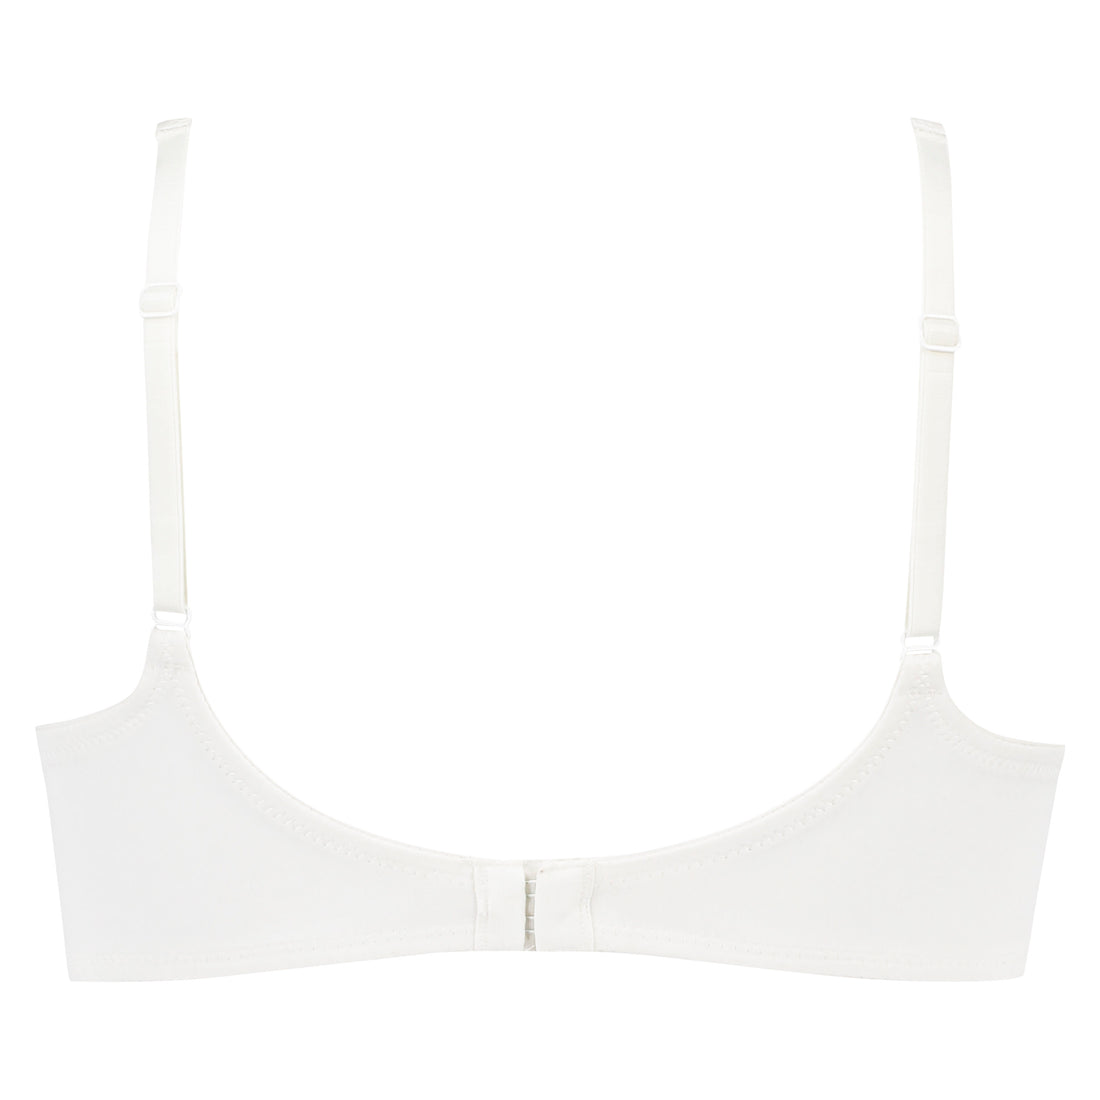 Satin Ts Pp In Different Cup Sizes_169210_Off White_02